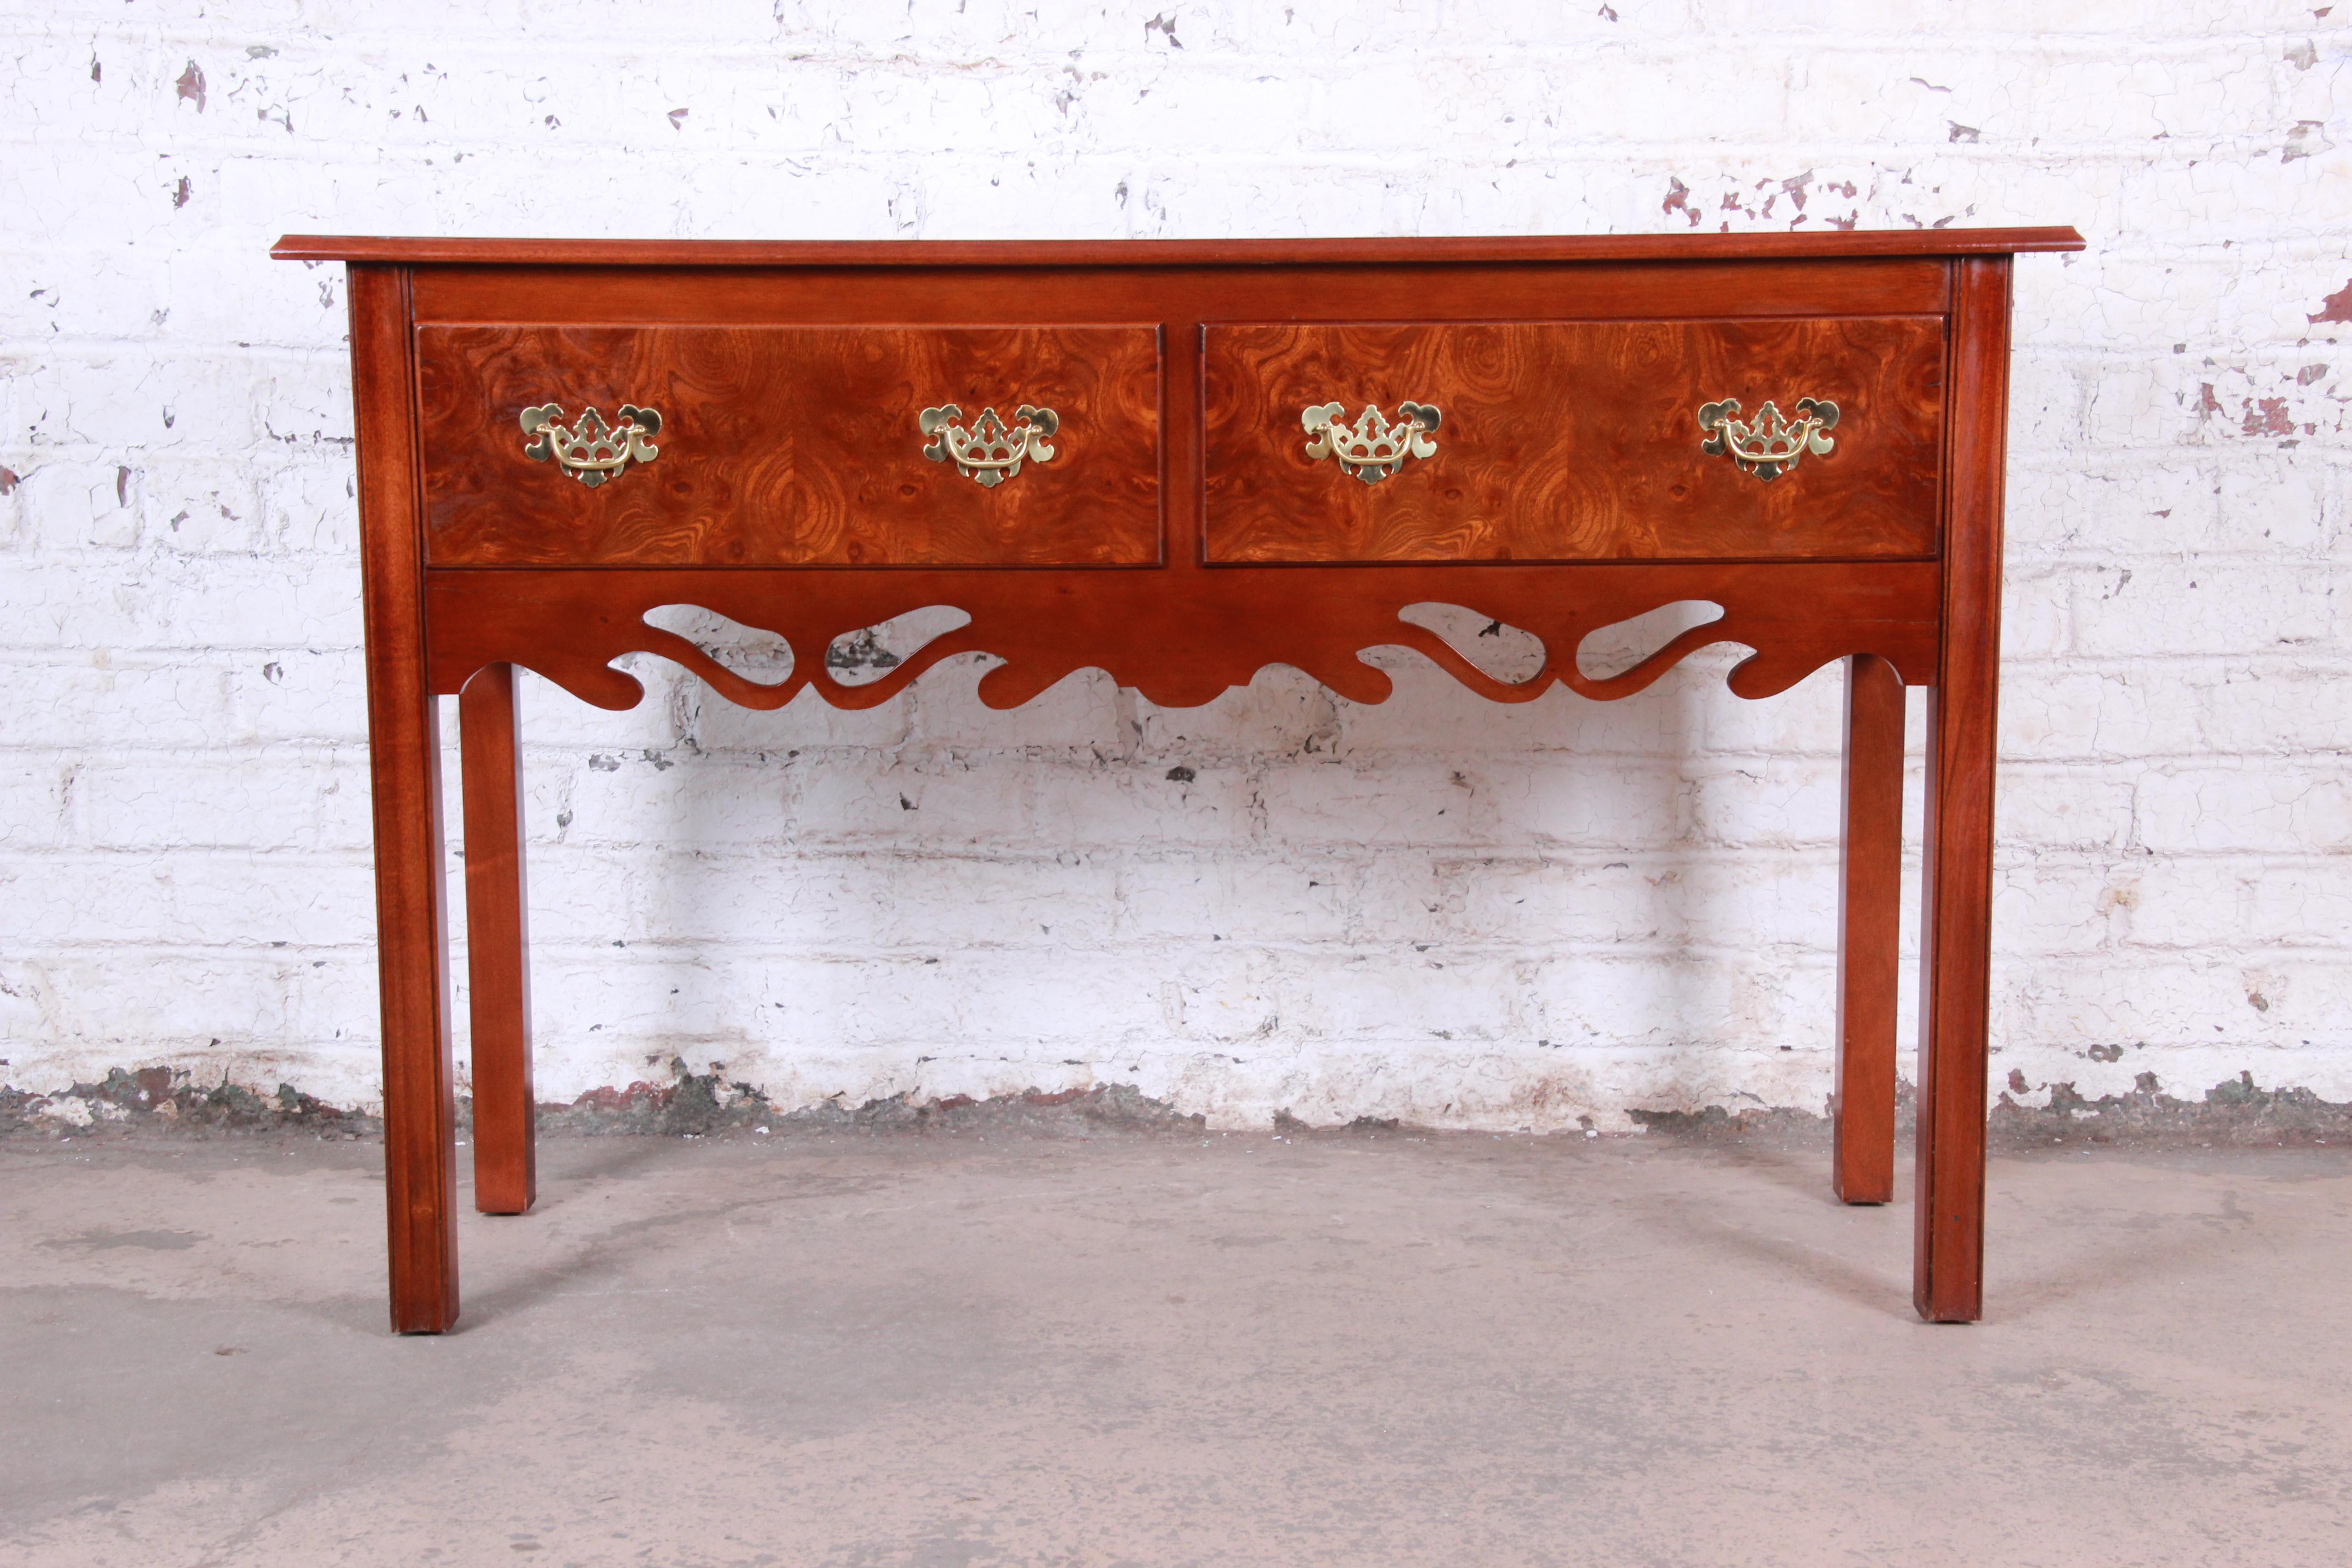 A gorgeous Georgian style mahogany and burl wood sideboard credenza or console table

Unmarked but similar in quality and construction to pieces by Baker Furniture

USA, circa 1980s

burl wood and mahogany and brass hardware

Measures: